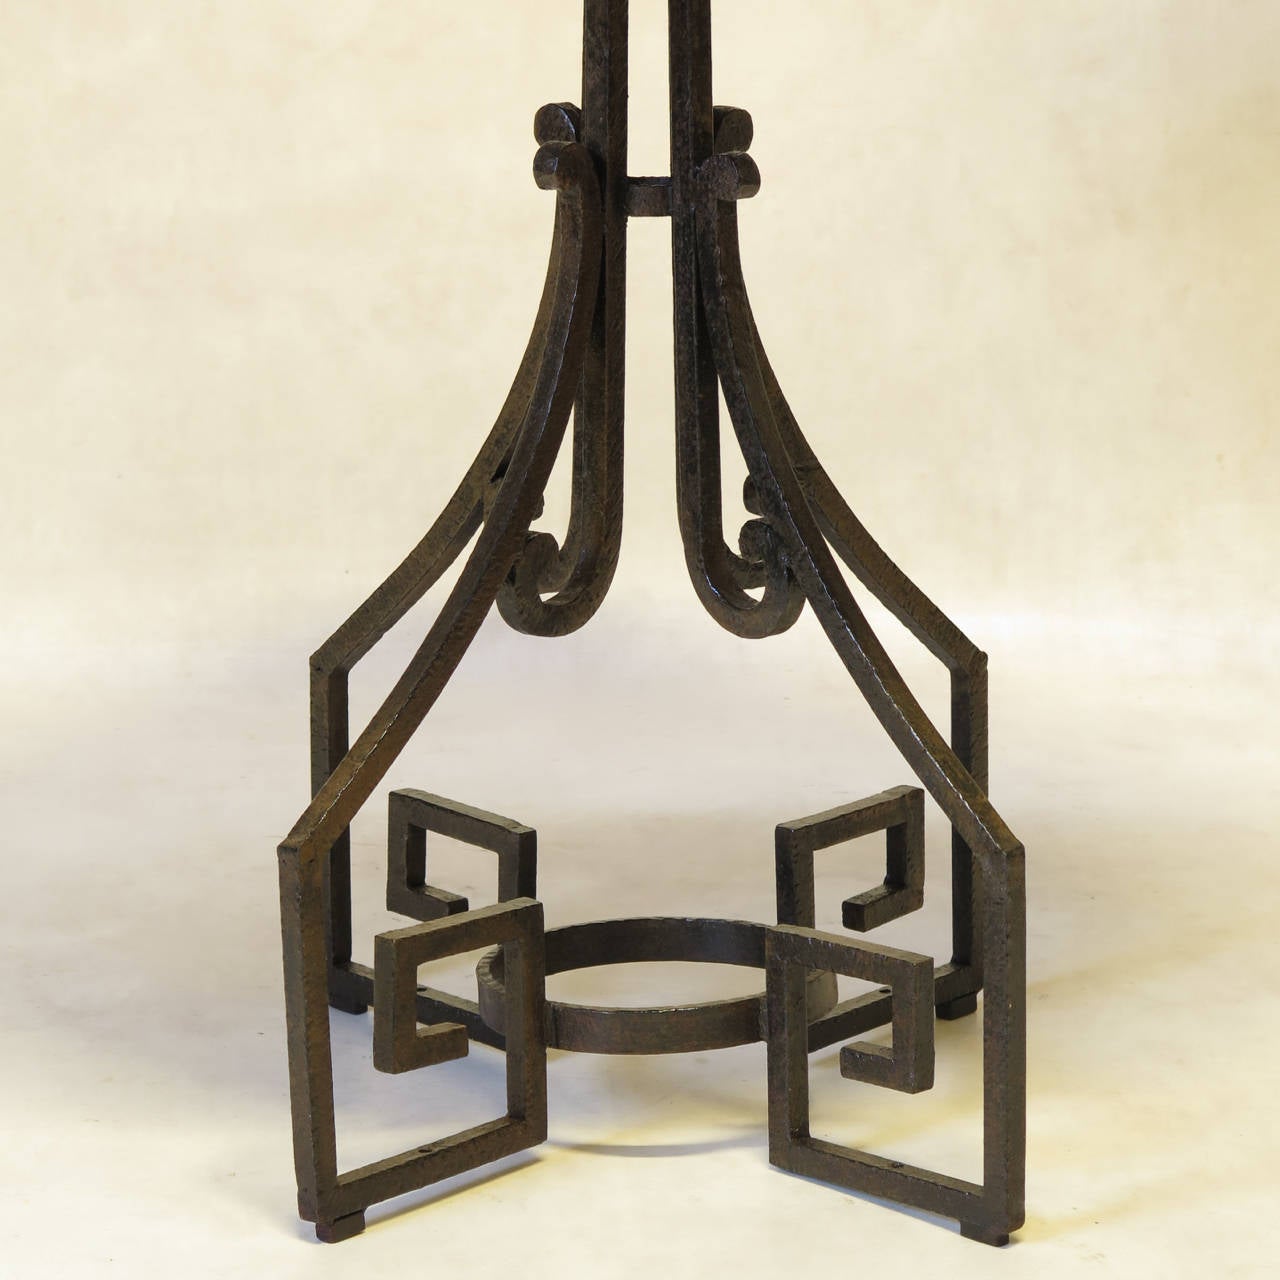 Smart Art Deco wrought iron gueridon with greek key motif and a white marble top.